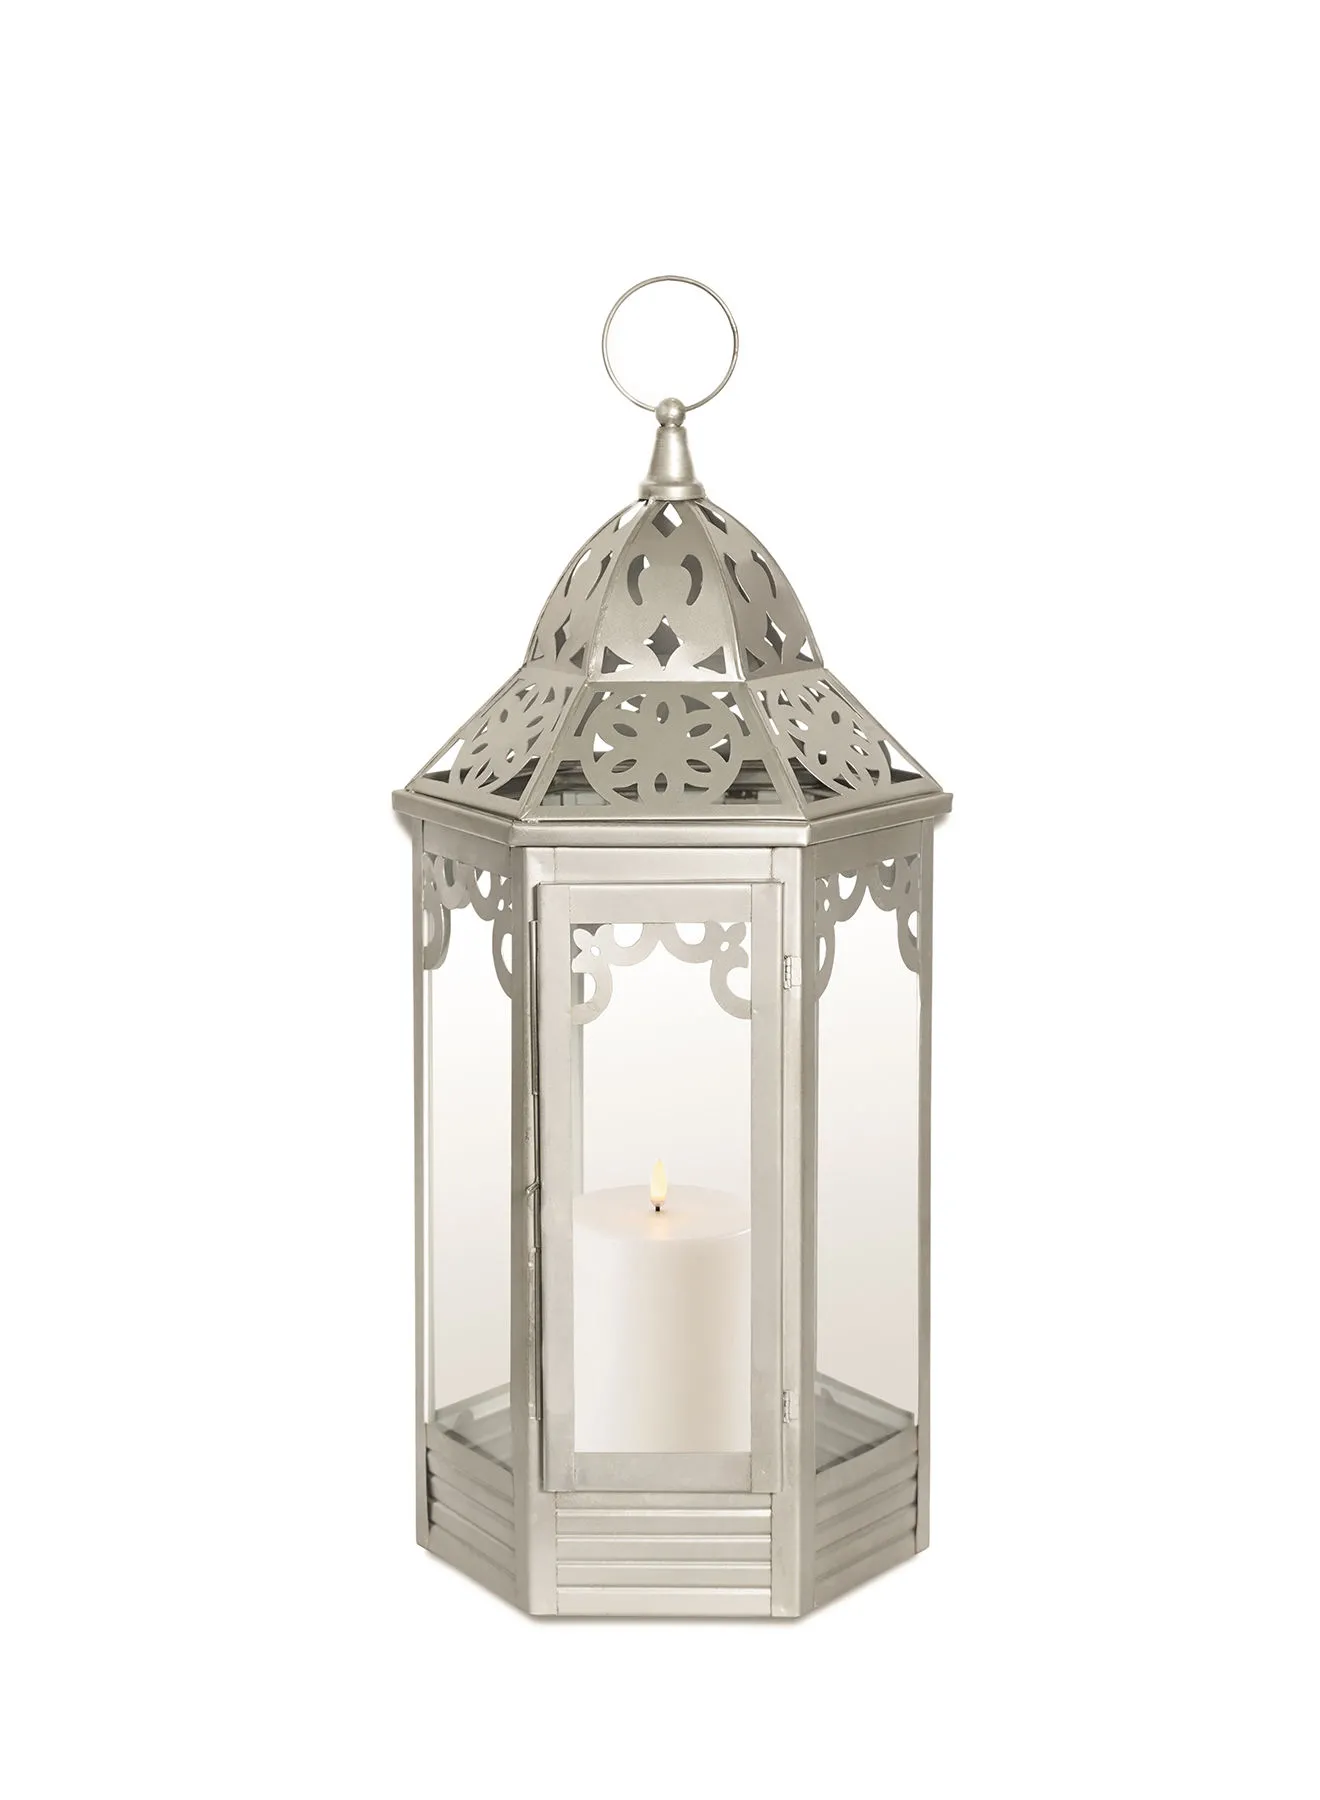 ebb & flow Modern Ideal Design Handmade Lantern Unique Luxury Quality Scents For The Perfect Stylish Home Silver 18X18X54centimeter